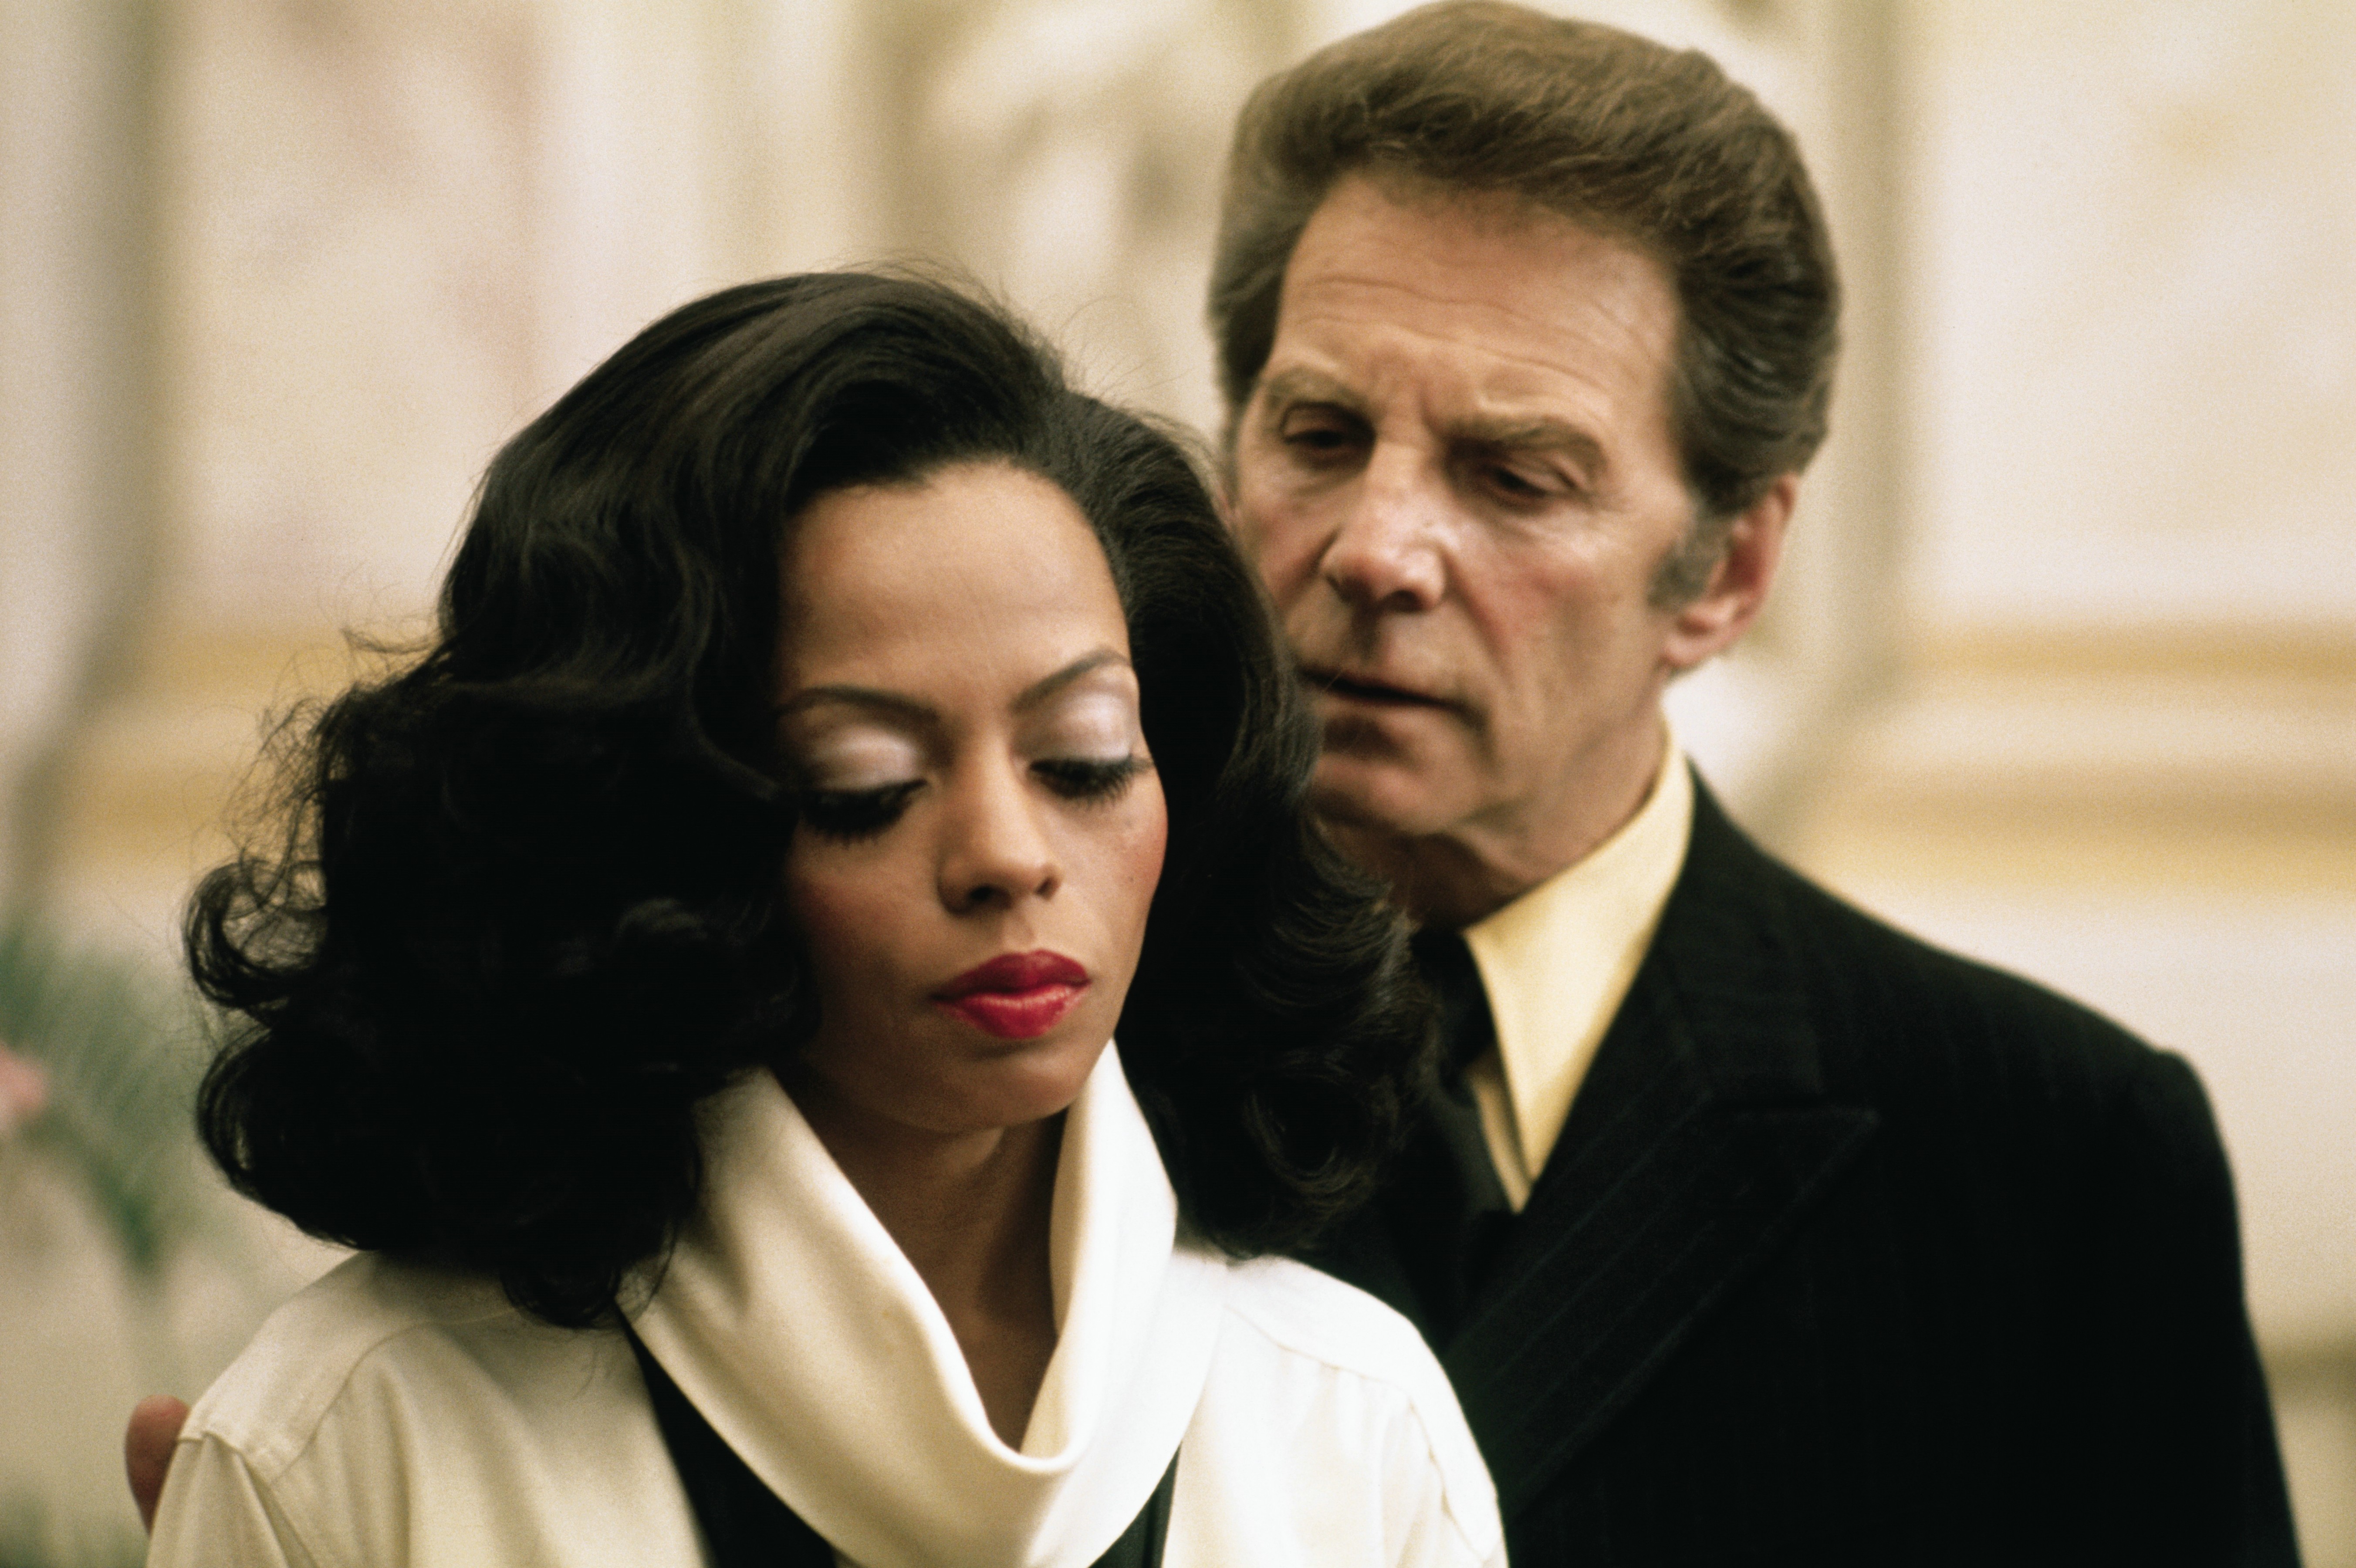 Still of Jean-Pierre Aumont and Diana Ross in Mahogany (1975)